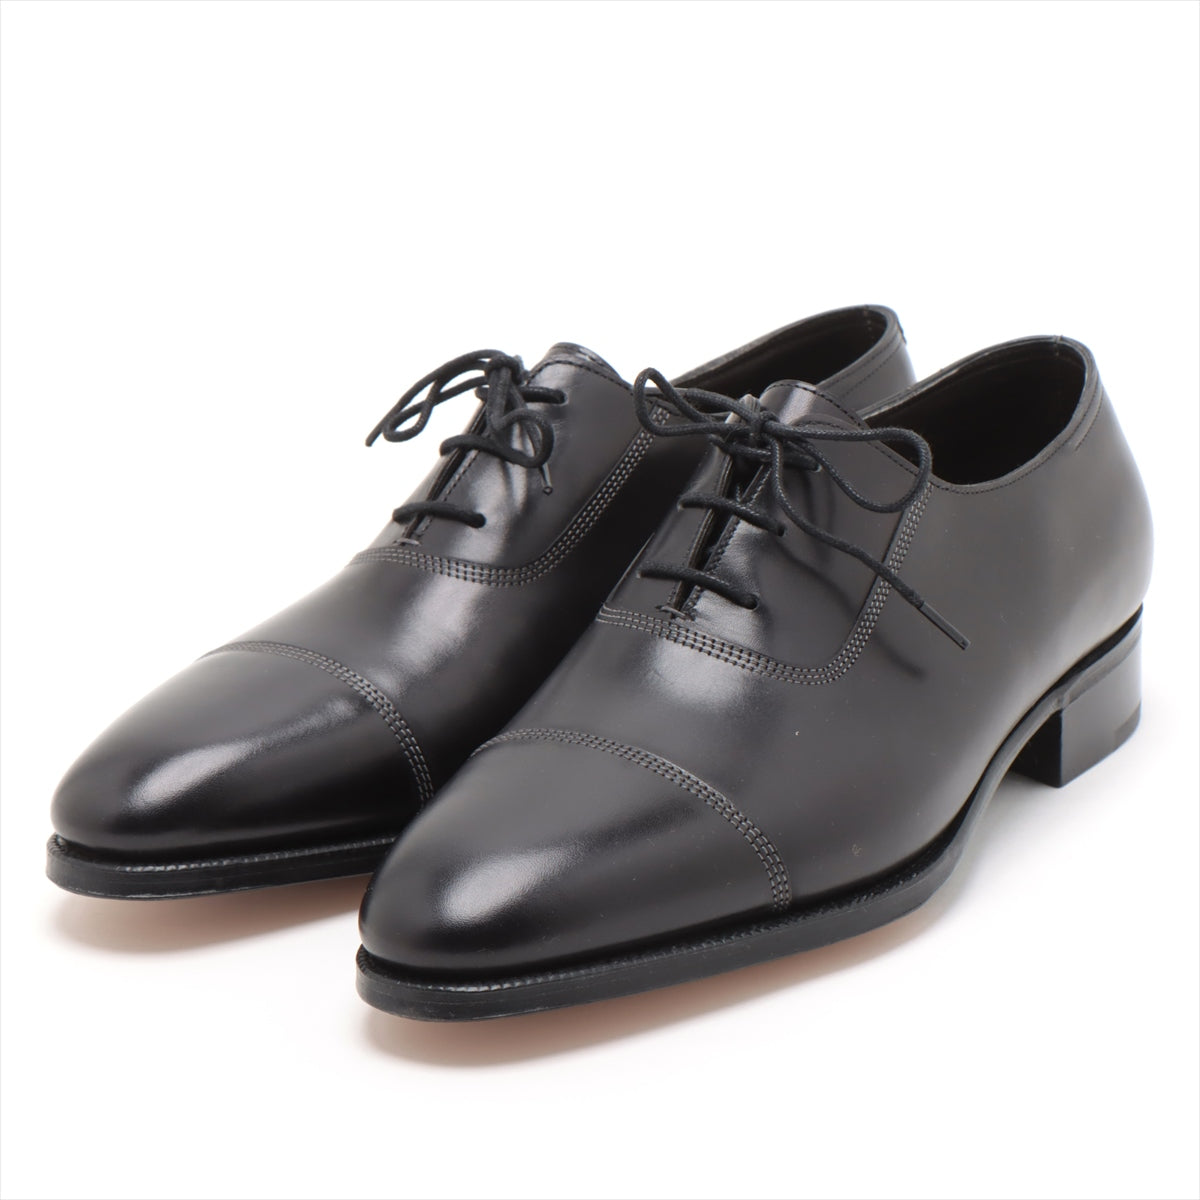 John Lobb Leather Leather shoes 7 1/2 Men's Black Straight tip Comes with genuine shoe keeper